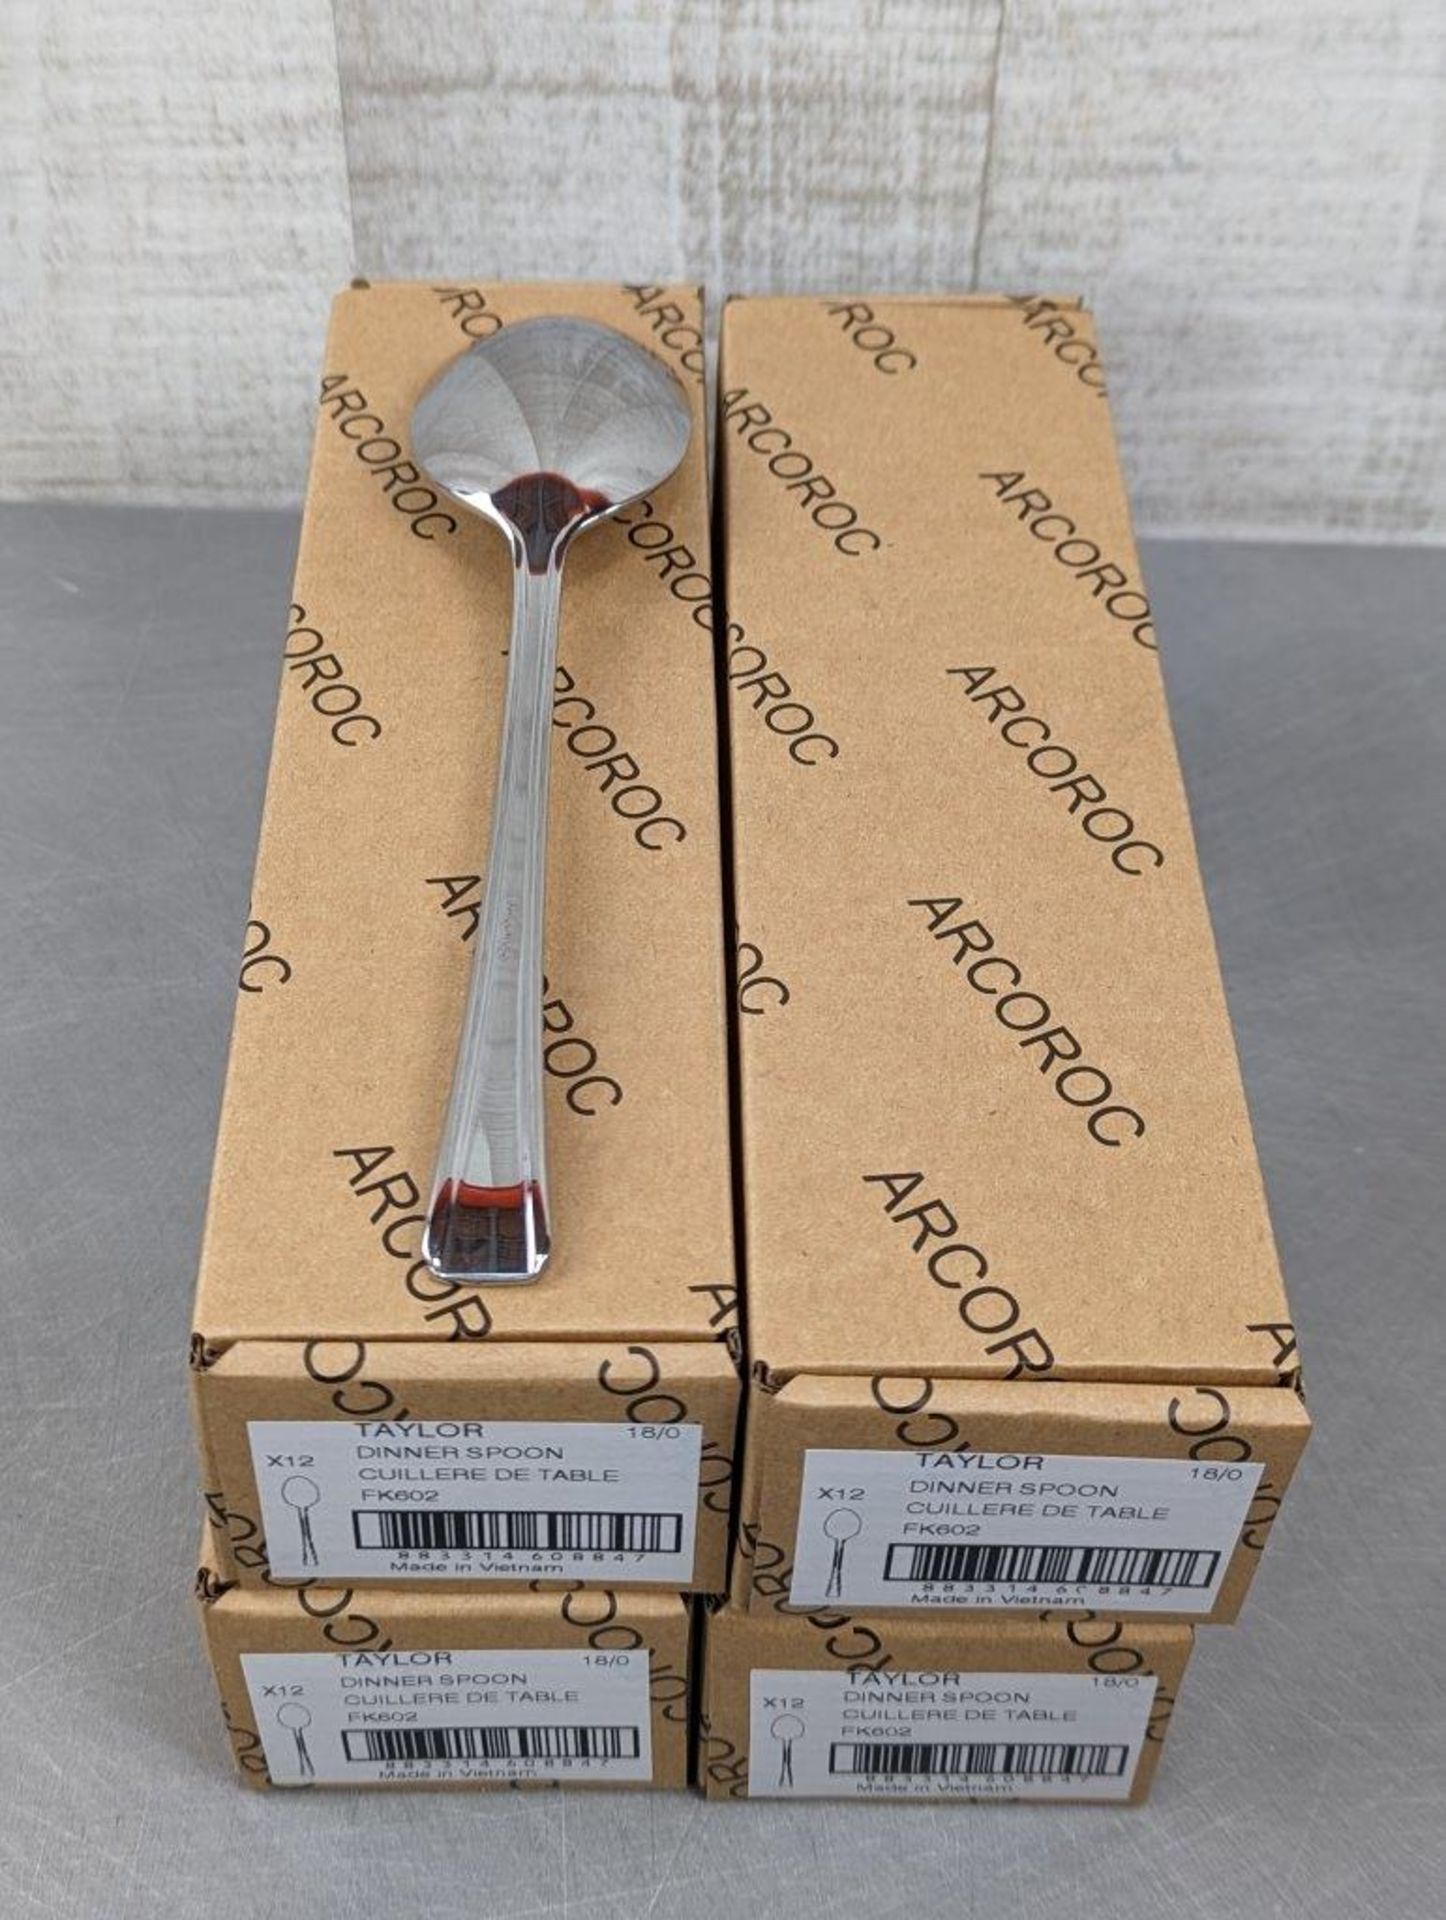 TAYLOR DINNER SPOONS, ARCOROC FK602 - LOT OF 48 - Image 3 of 3